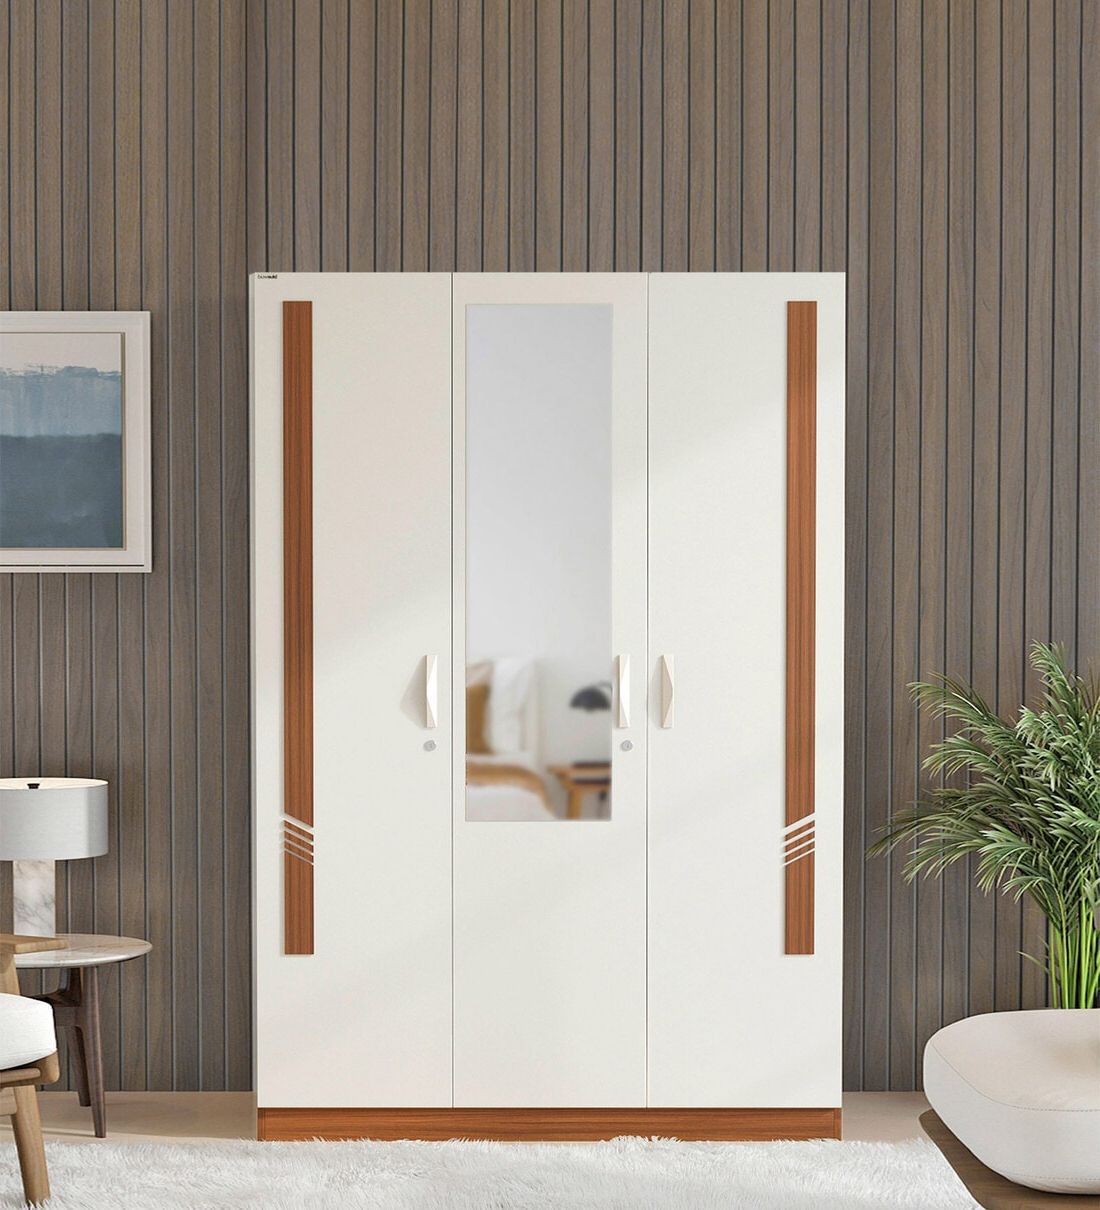 Buy Andrie 3 Door Wardrobe In Walnut & White Finish With Mirror At 24% Off Bluewud | Pepperfry In Single White Wardrobes With Mirror (Gallery 6 of 20)